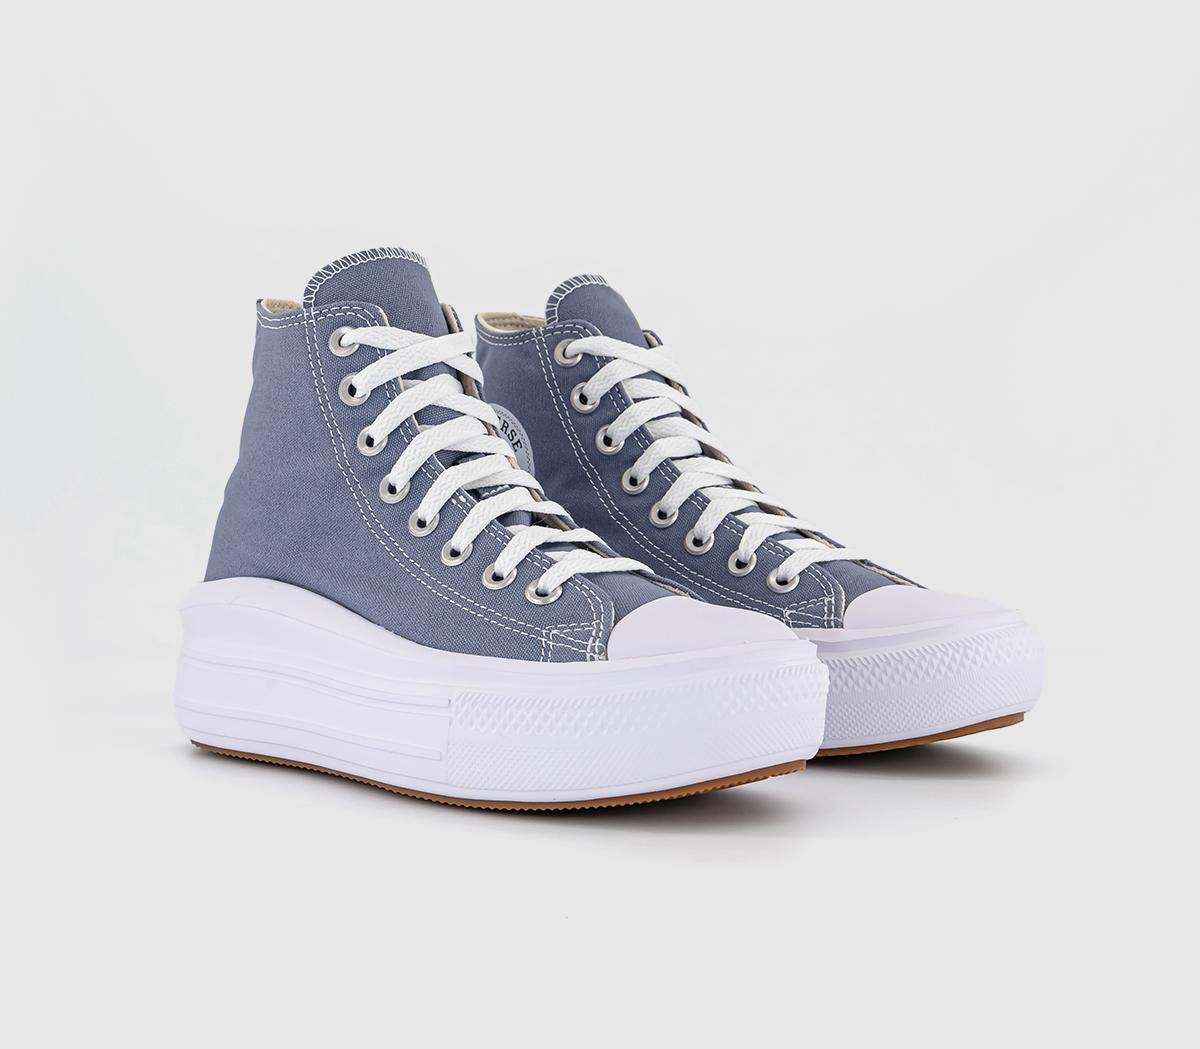 Converse All Star Move Trainers Thunder Daze White Gum - Women's Trainers